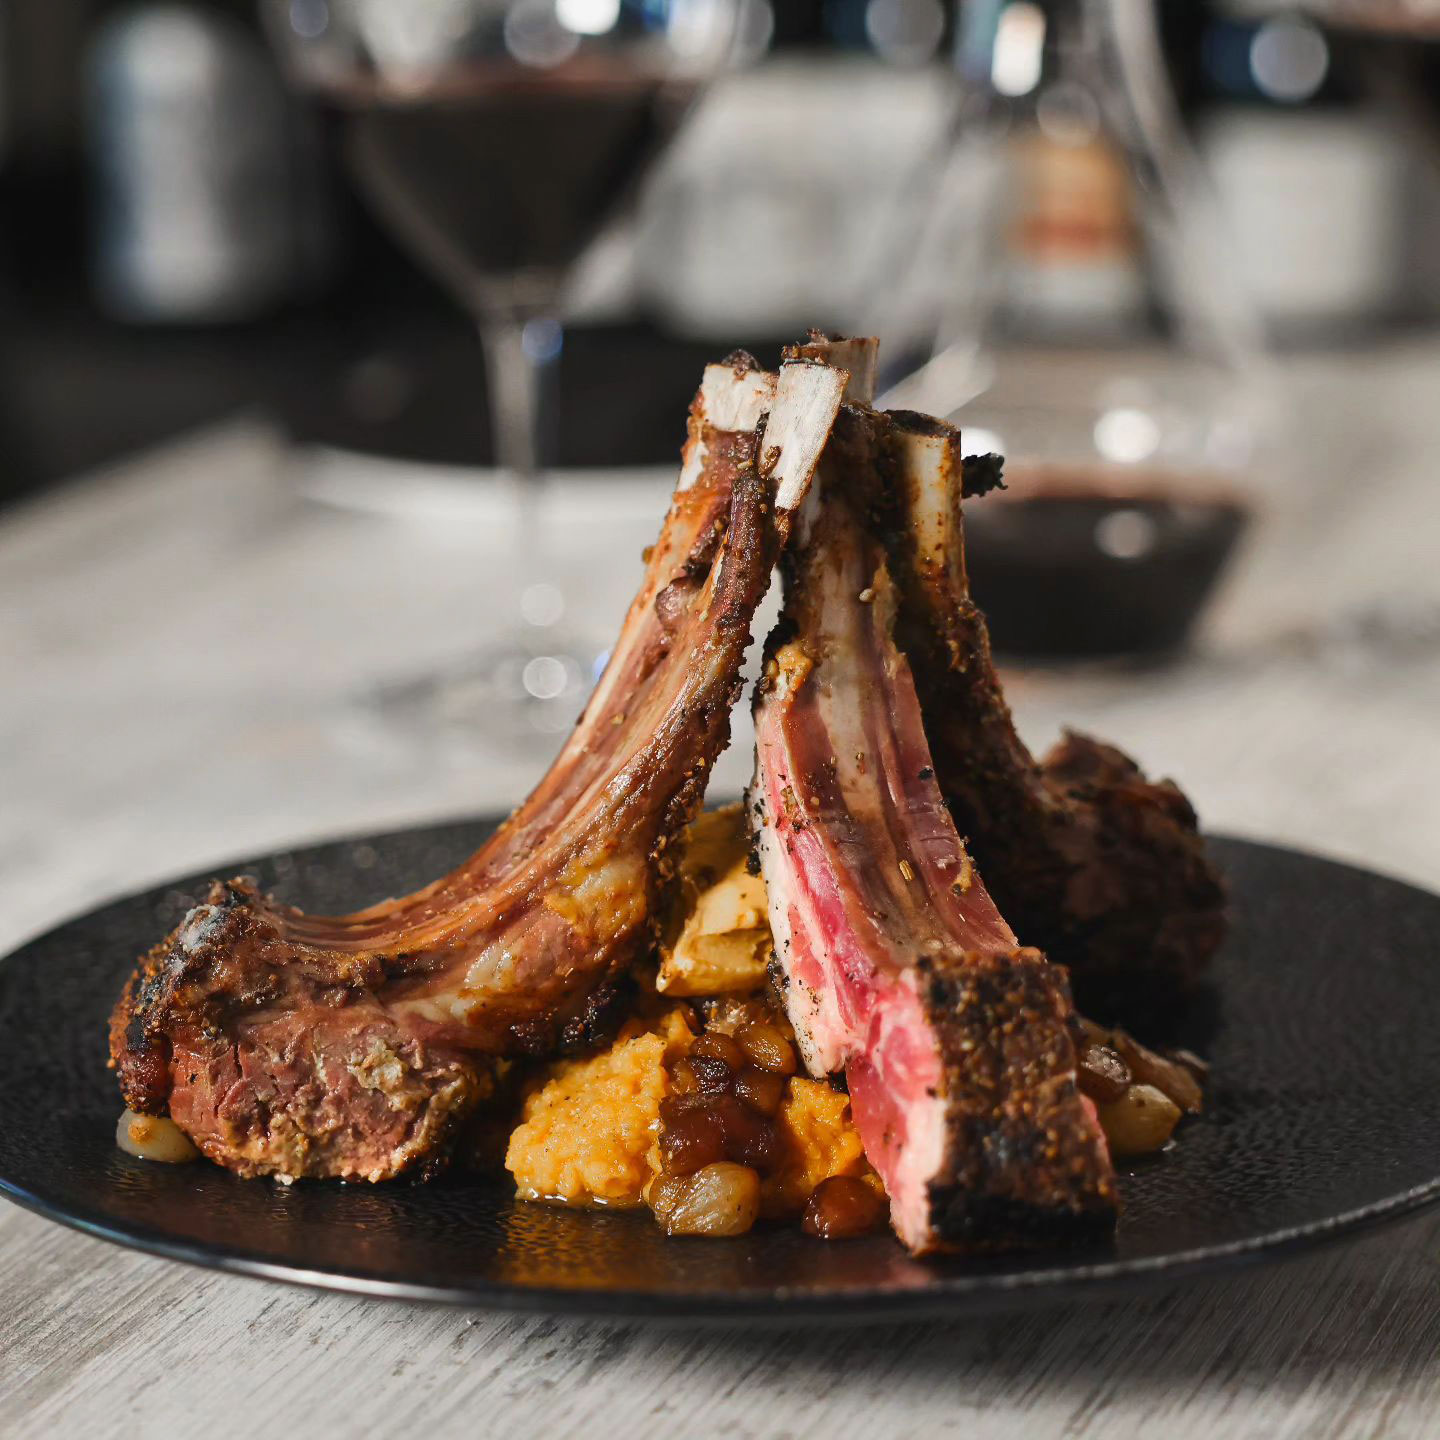 Corriander Crusted Lamb Chops - Sweet Potato Mash, Caramelized Okra, Chipotle Compound Butter